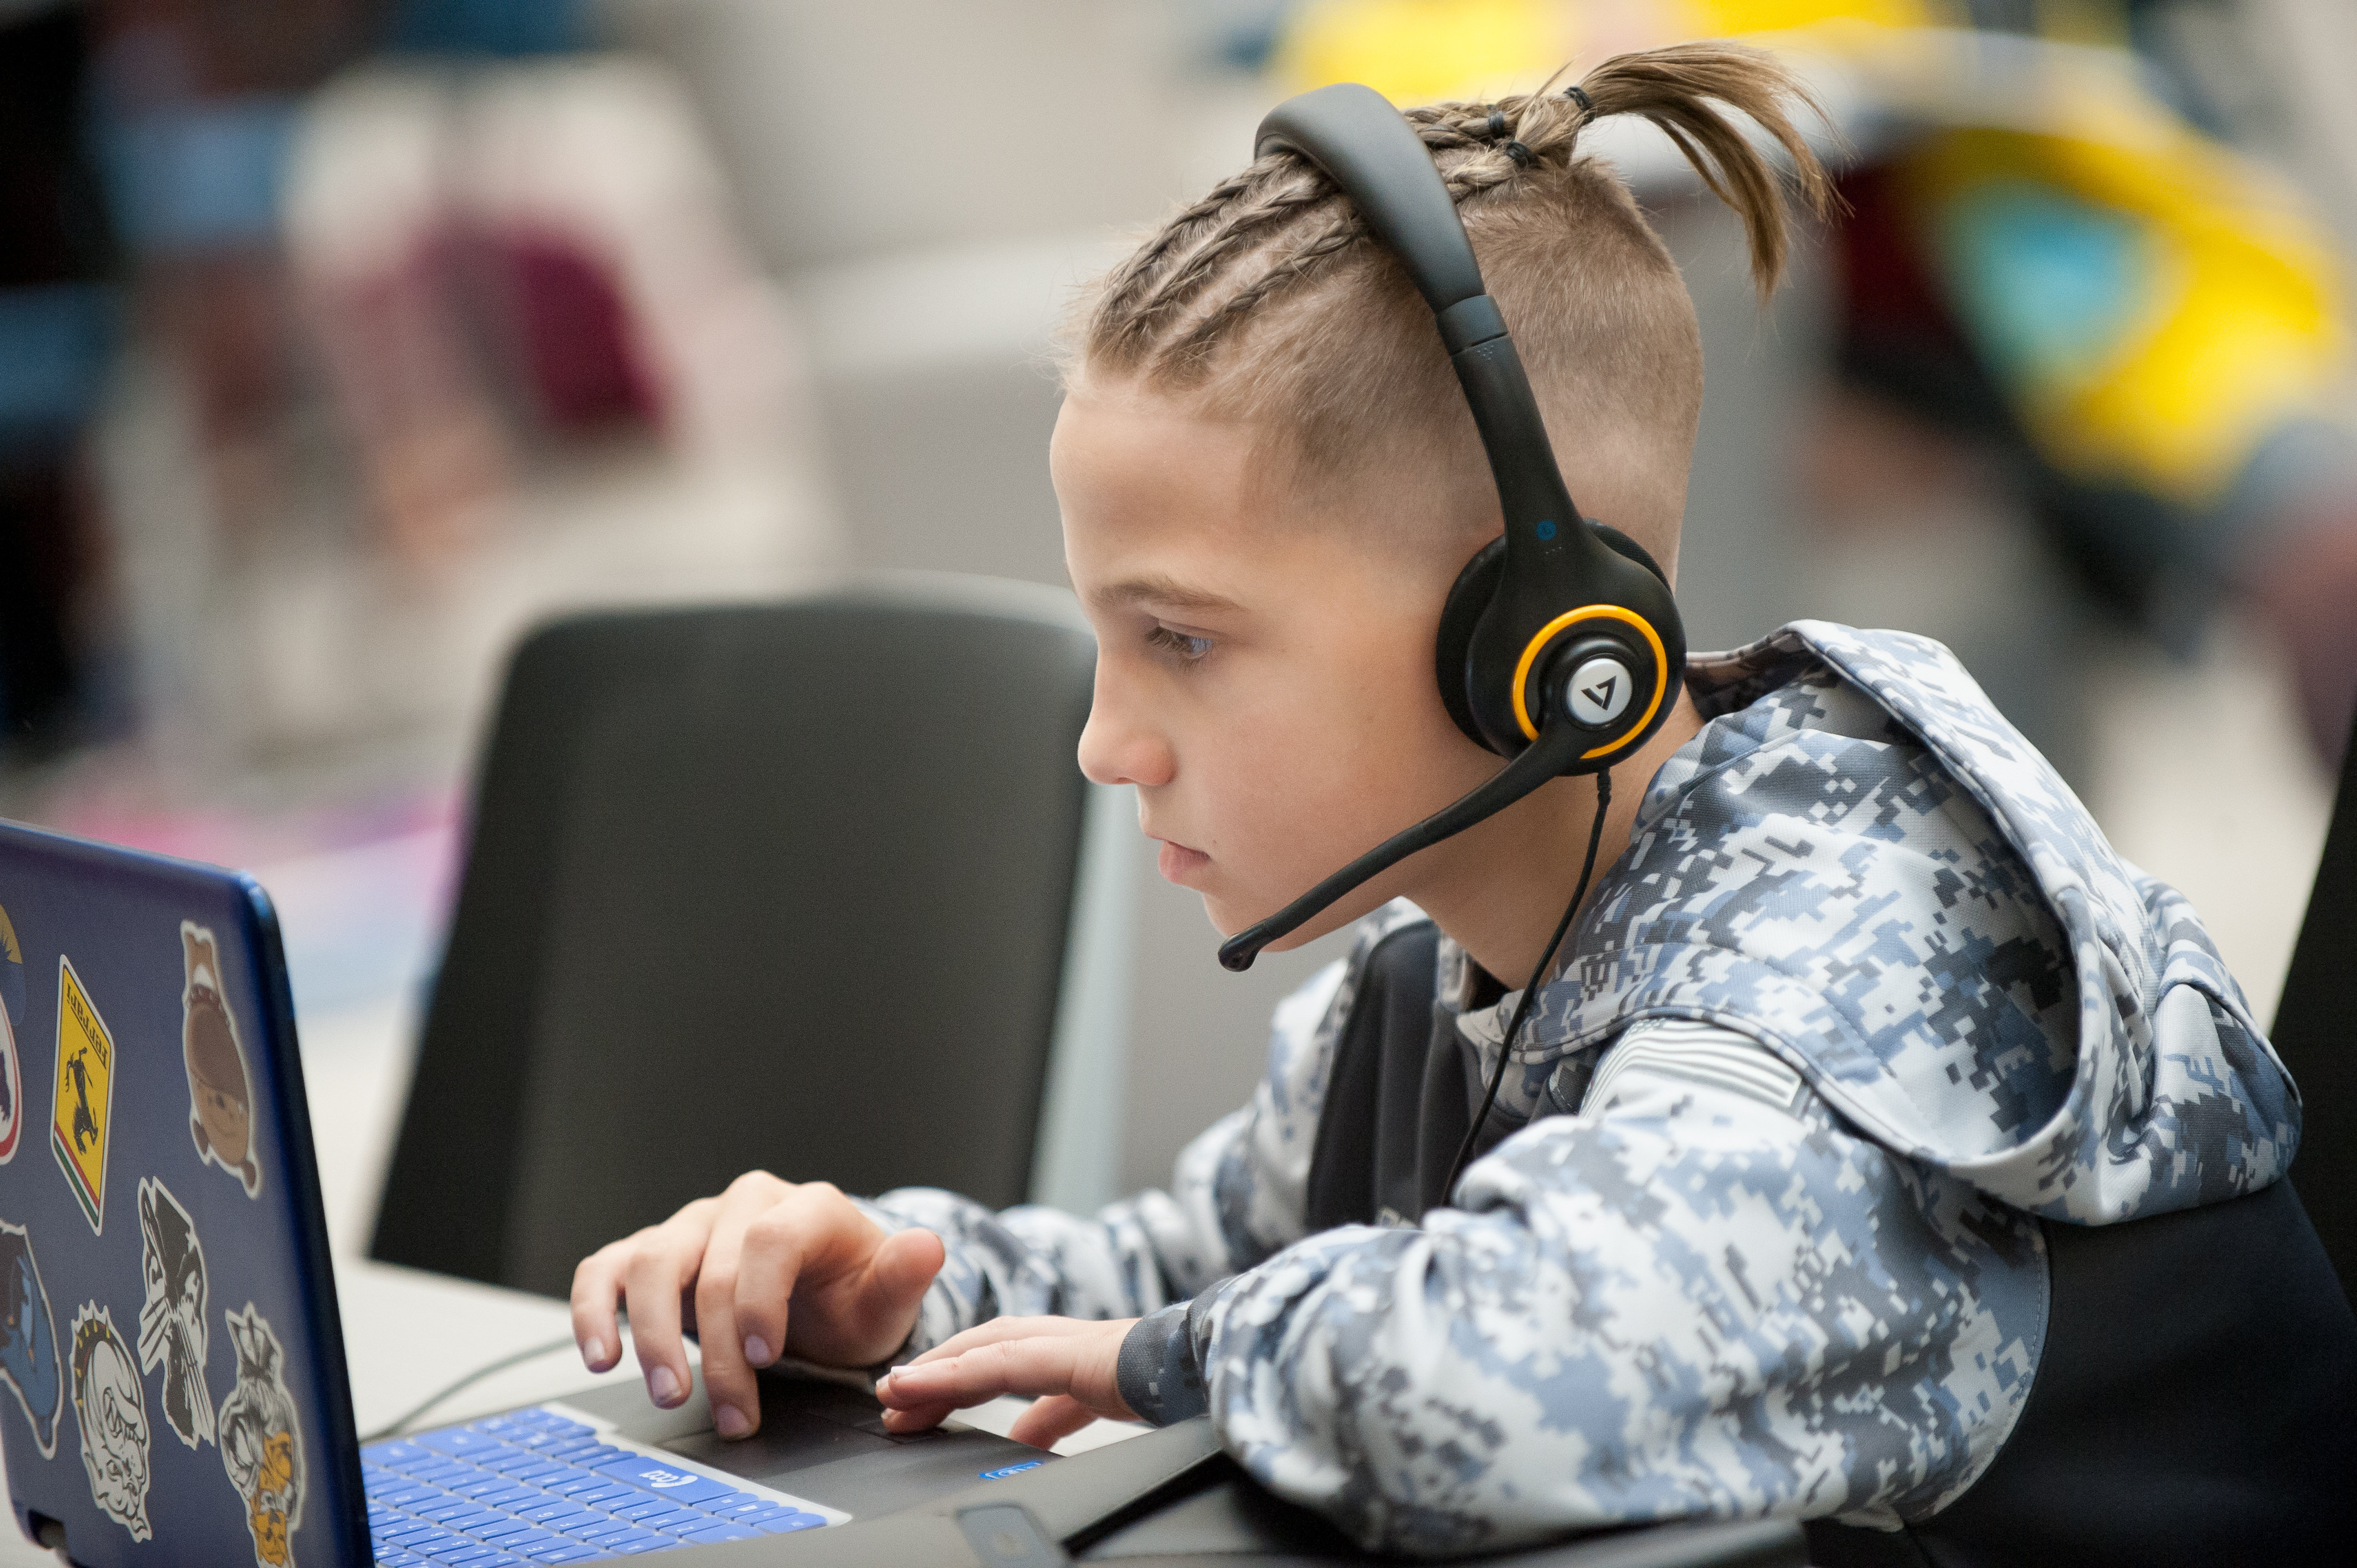 Boy wearing a headset and working on his laptop